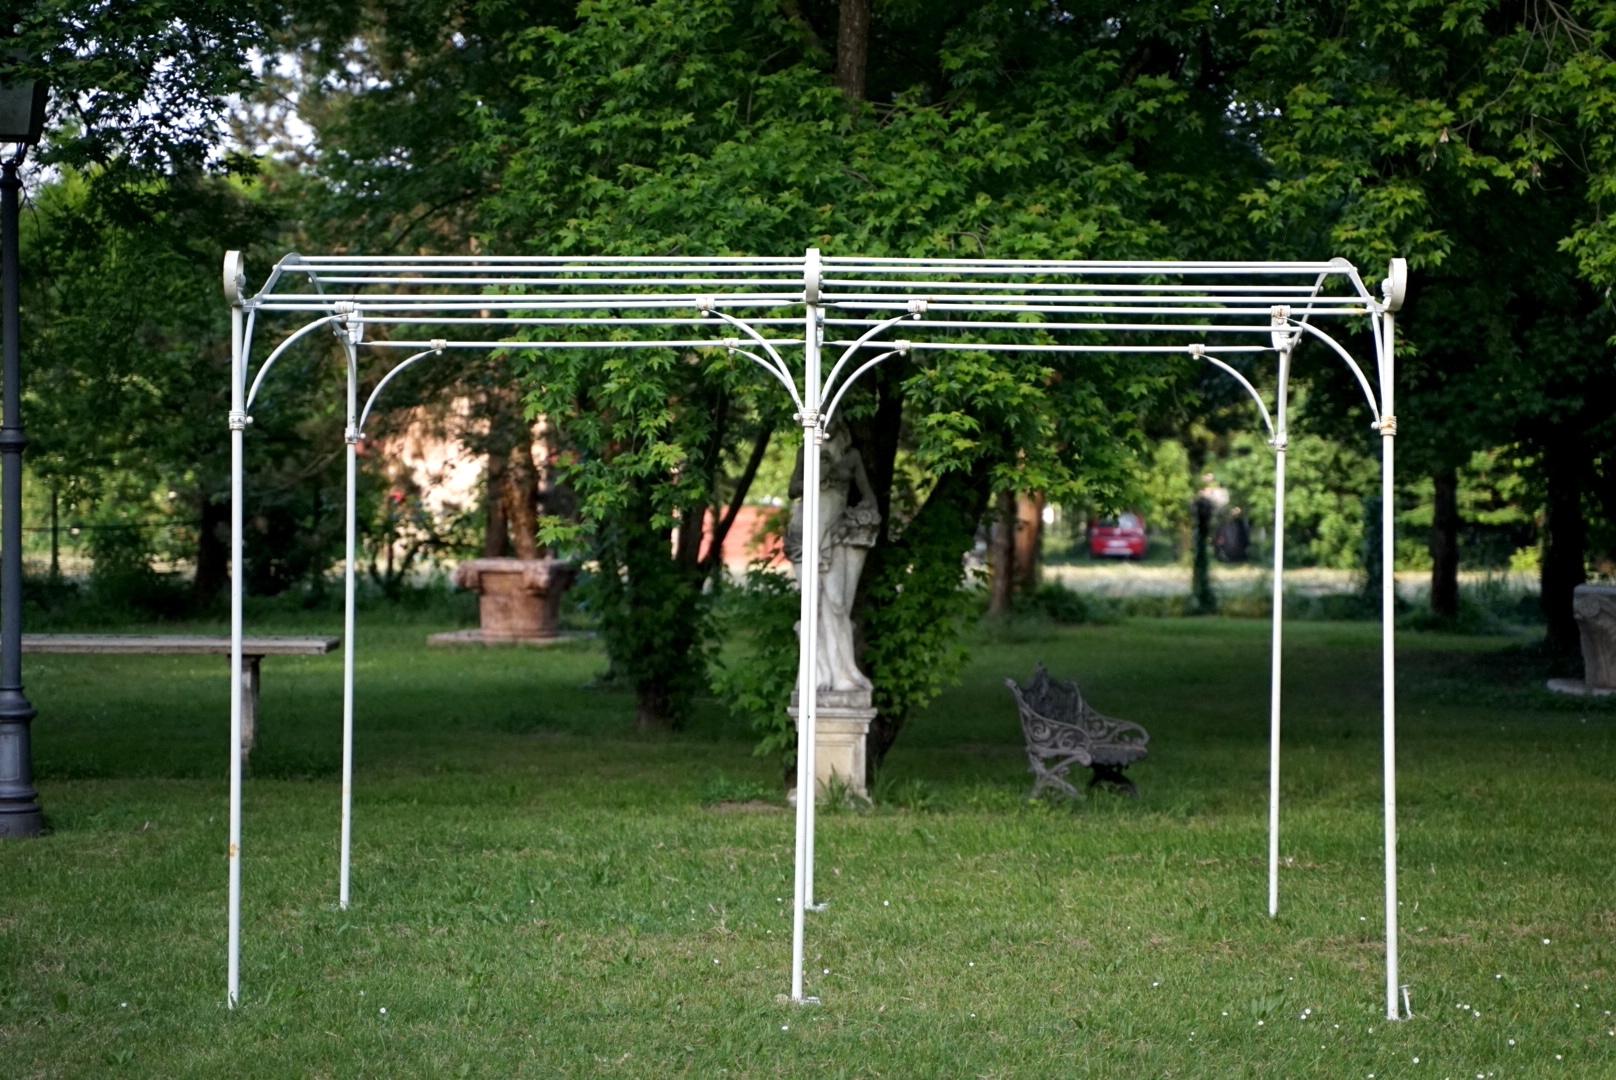 Period: 1930
Dimensions: 360 x 220 cm
Origin: Italy - Trieste
Condition: Excellent, extremely well-preserved.
Description: Refined and sophisticated, this wrought iron pergola is an authentic work of art dating back to 1930 and originating from